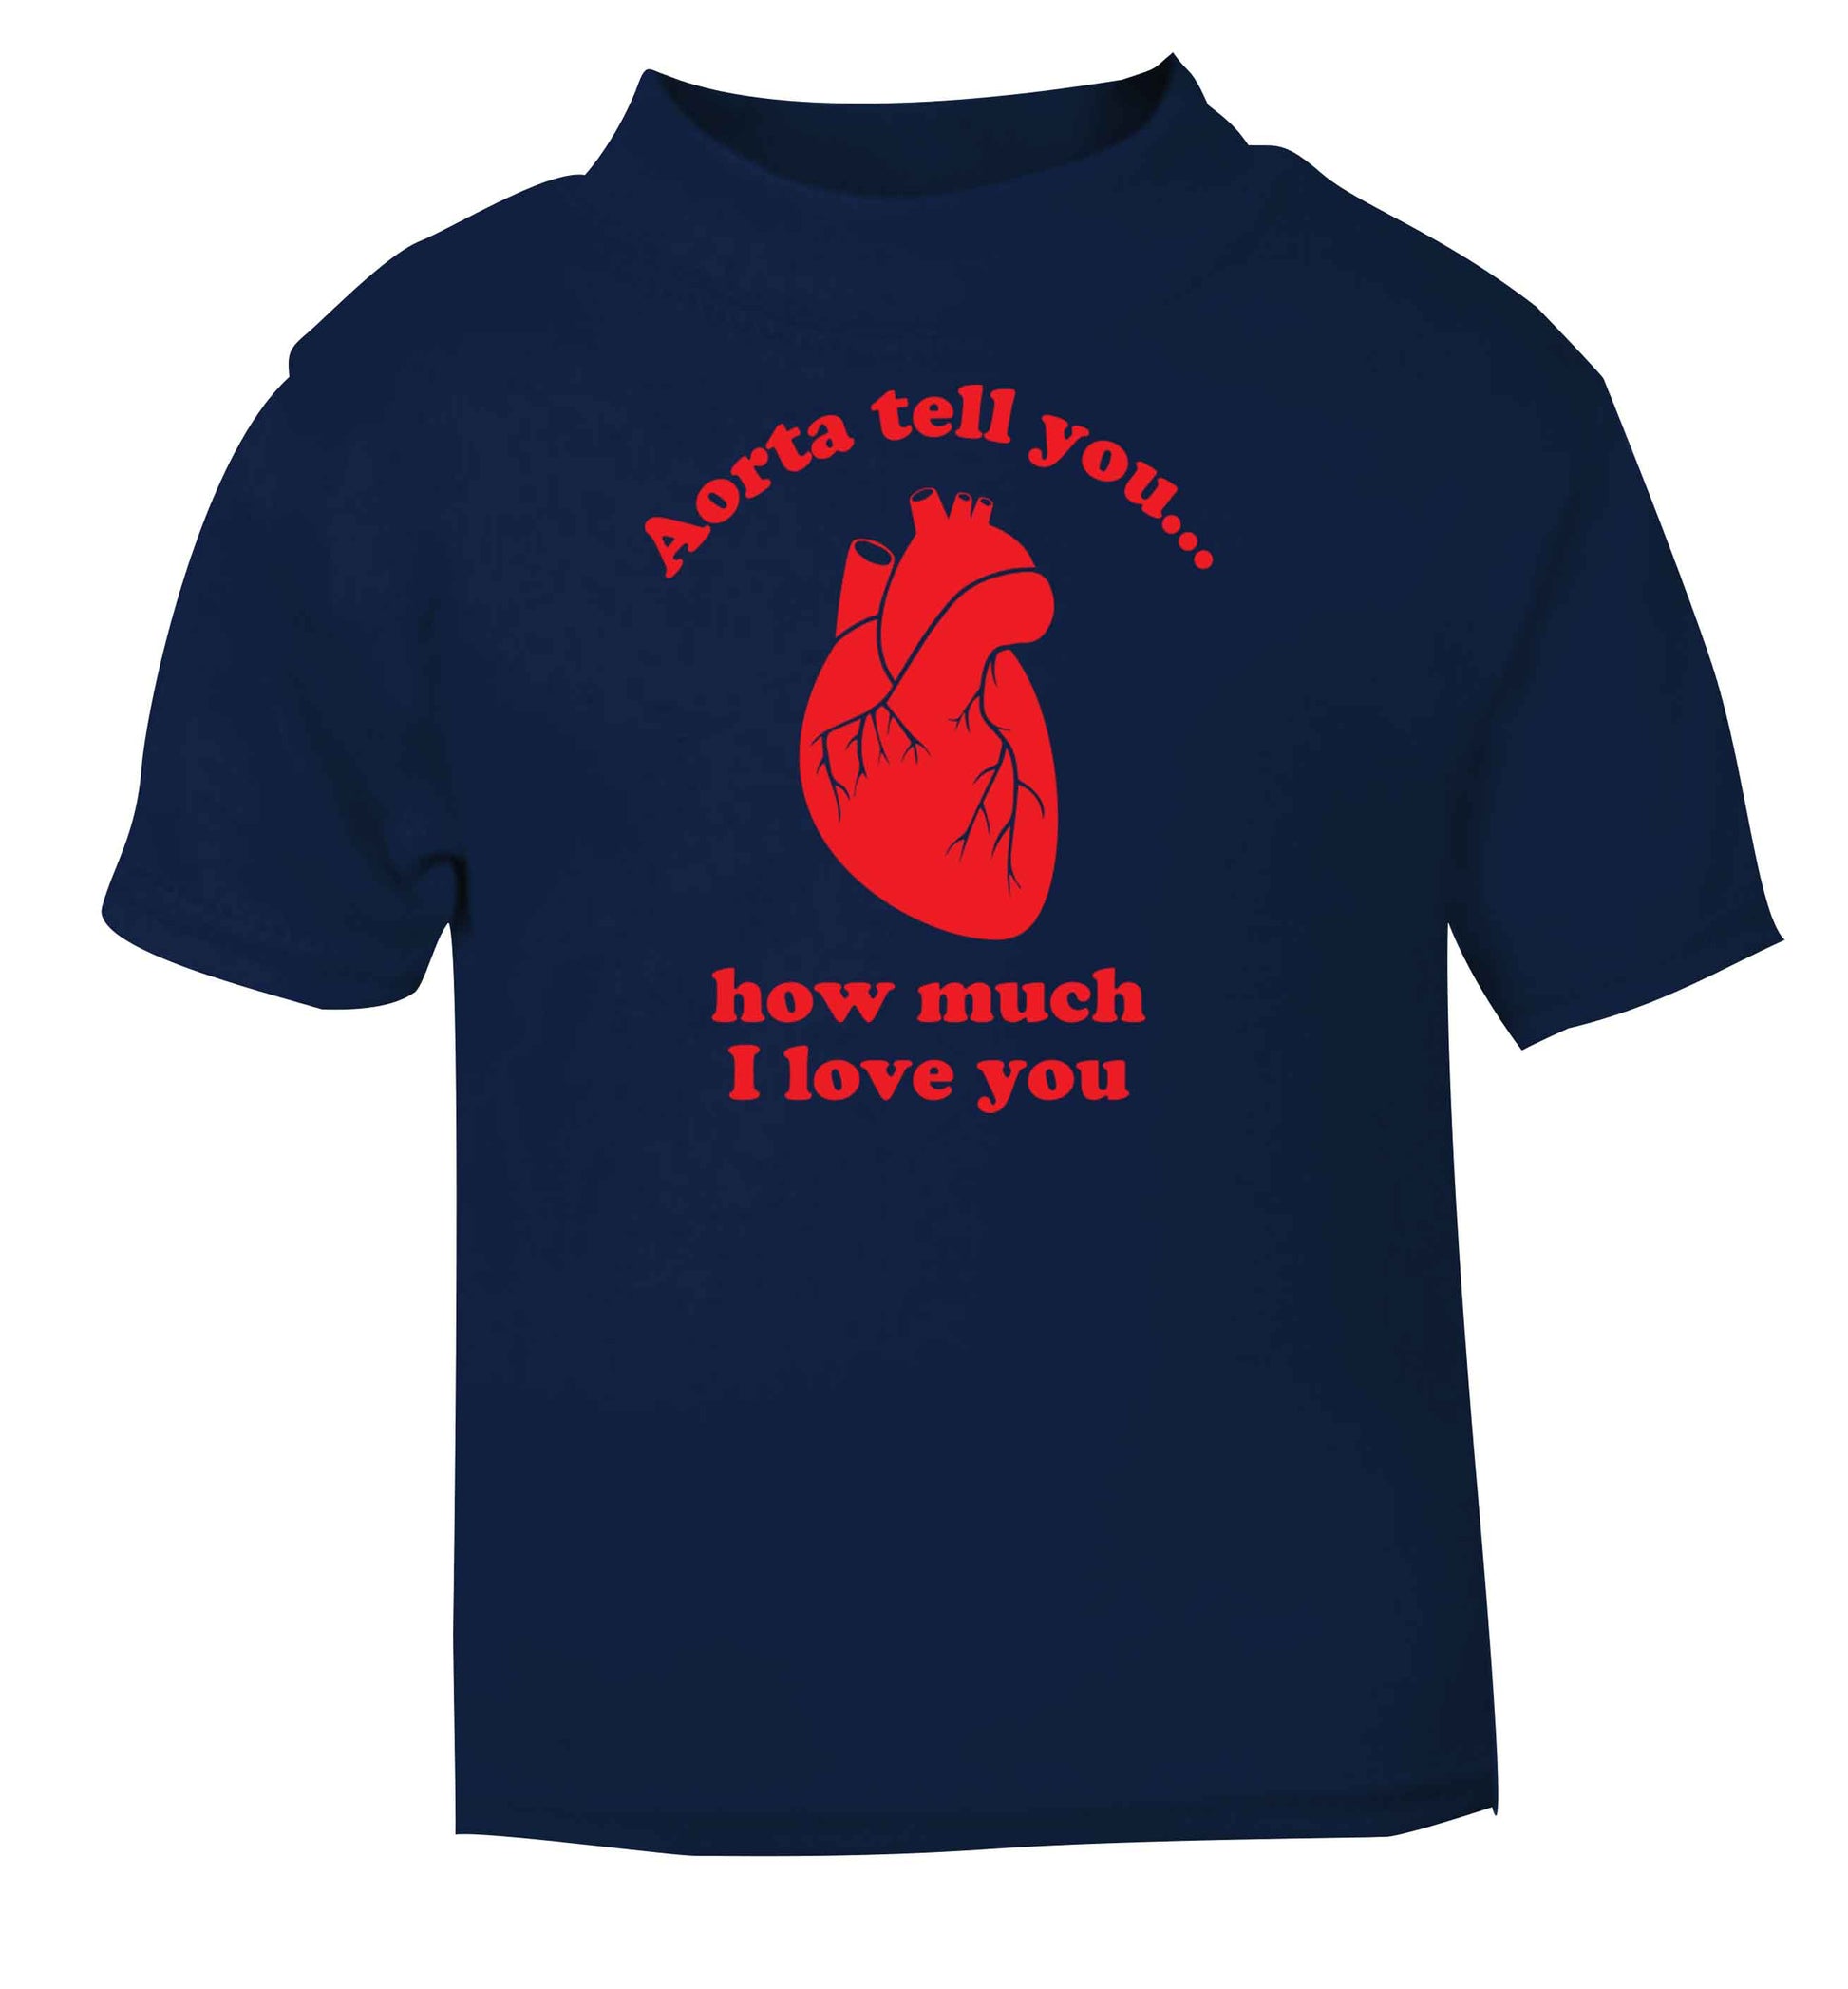 Aorta tell you how much I love you navy baby toddler Tshirt 2 Years